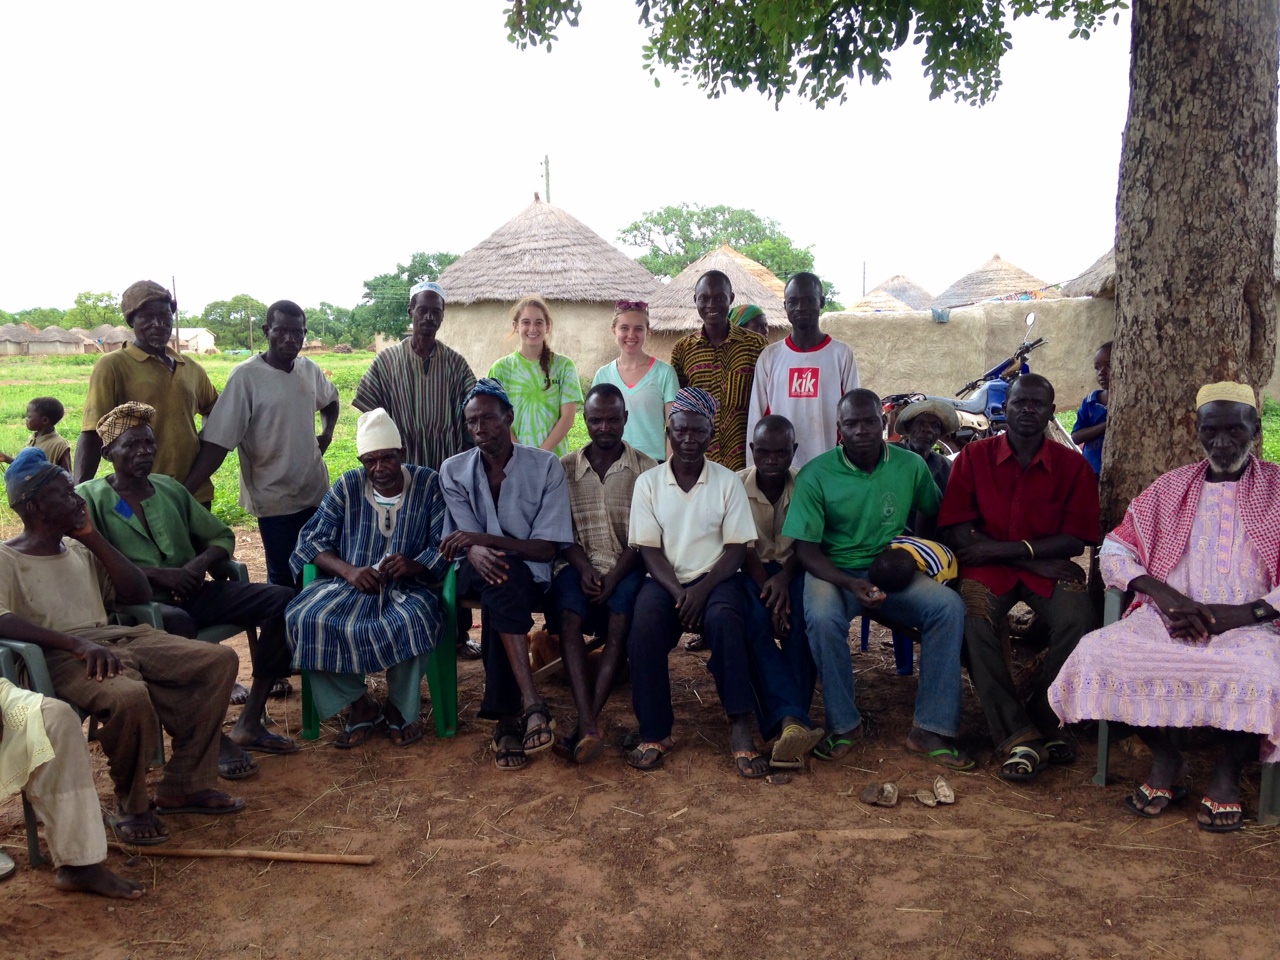 Some of the Elders and men of the village